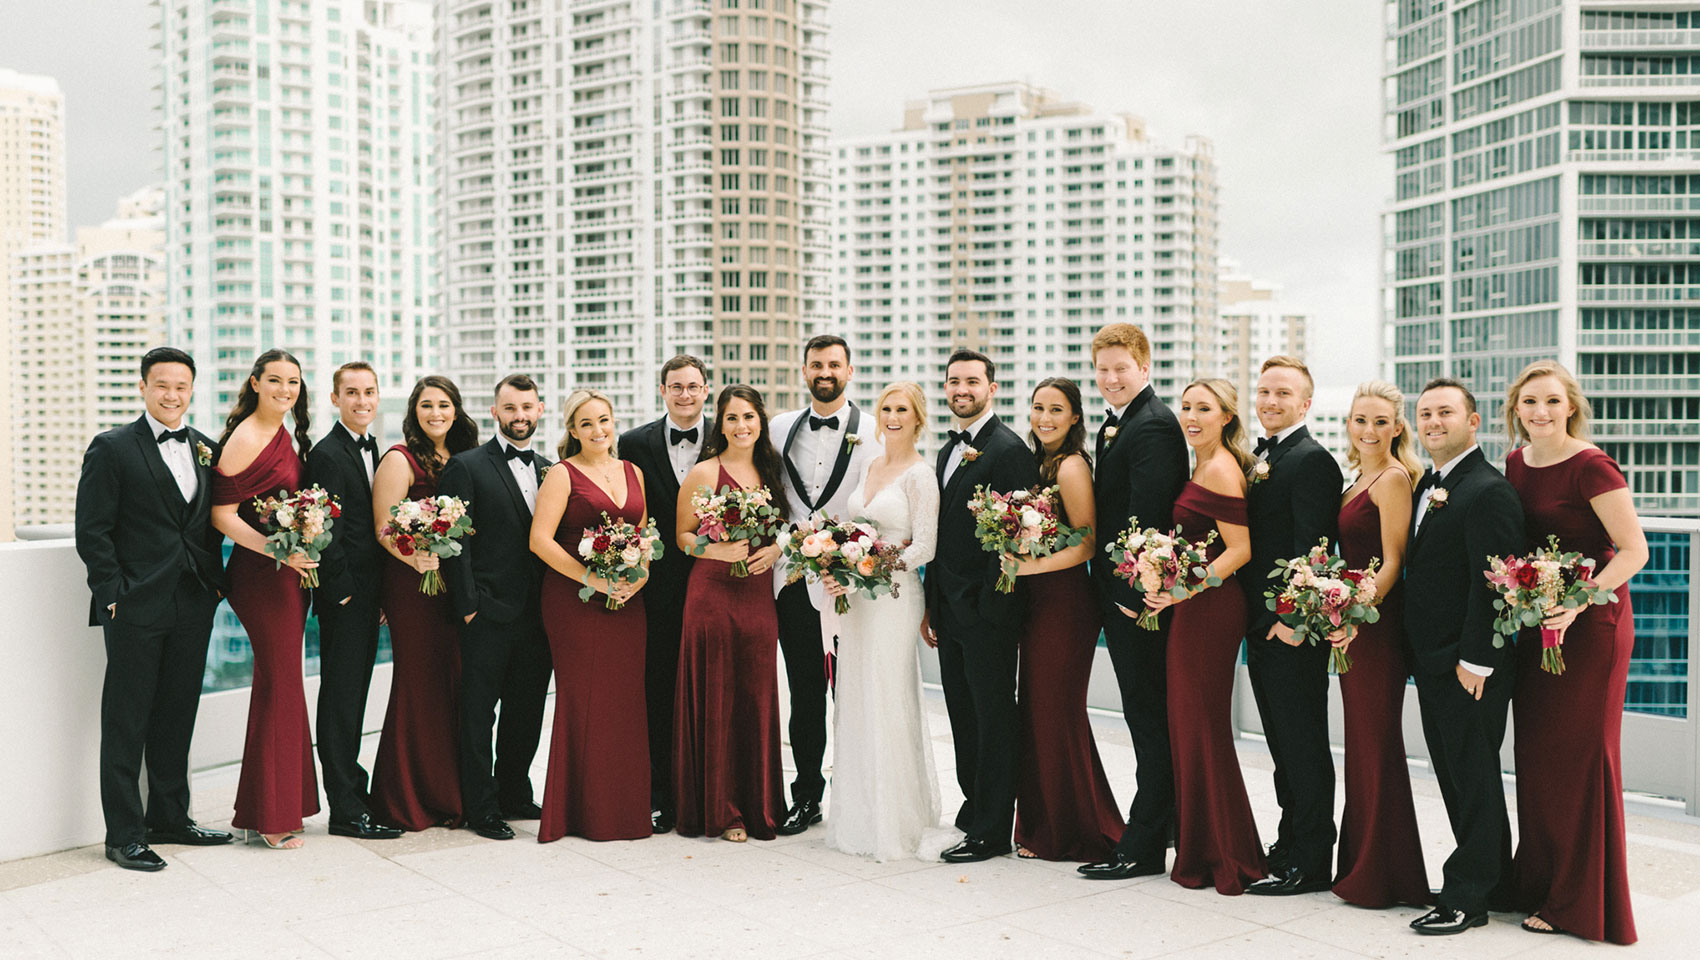 Wedding bridal party on our 16th floor pool deck overlooking the bay.